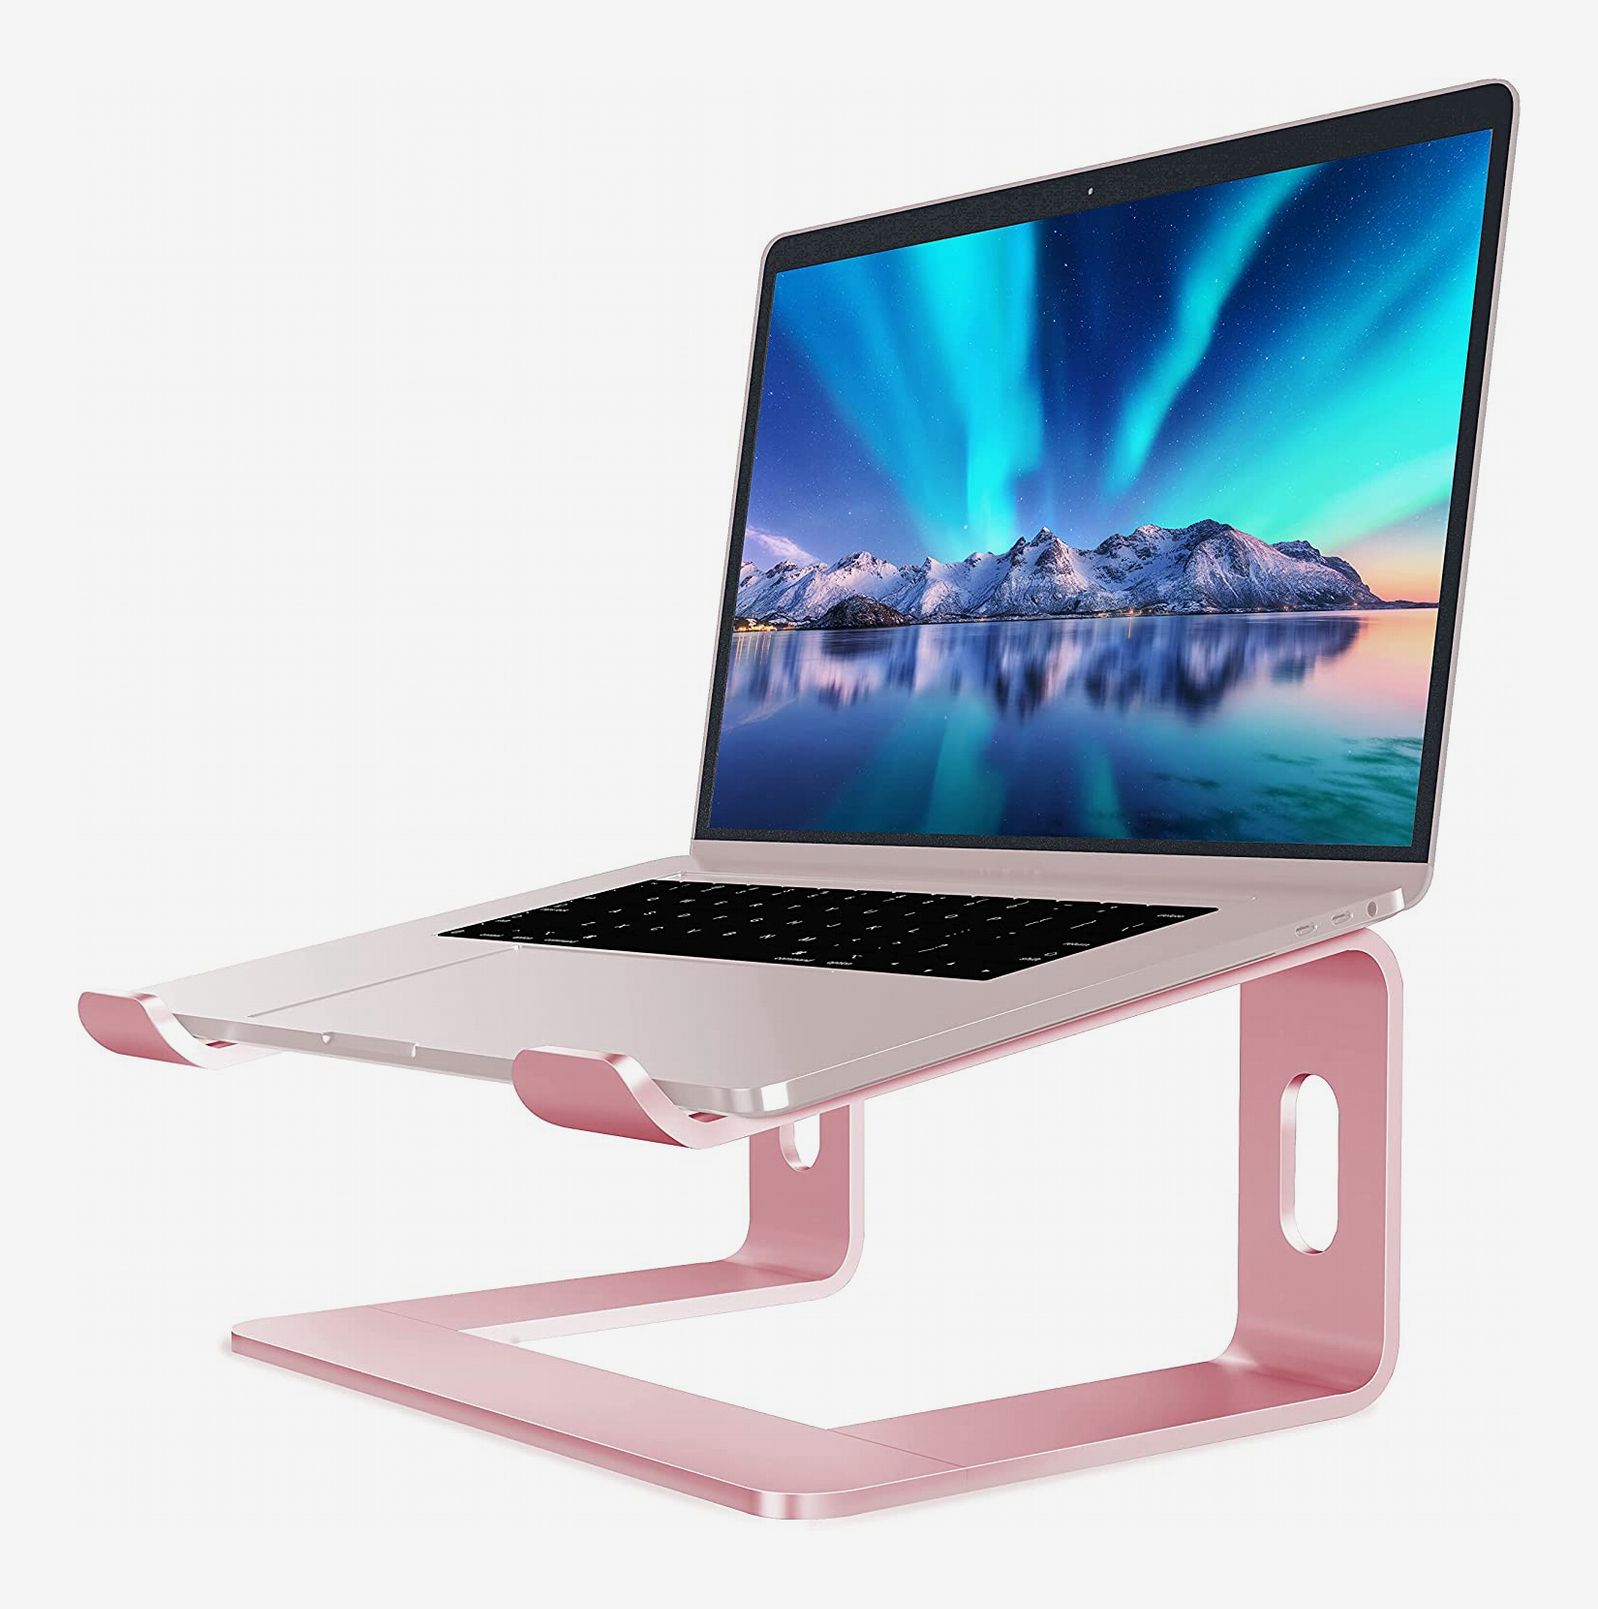 Ergonomic Laptop Pulpit Stand for desk, Adjustable height up to 20